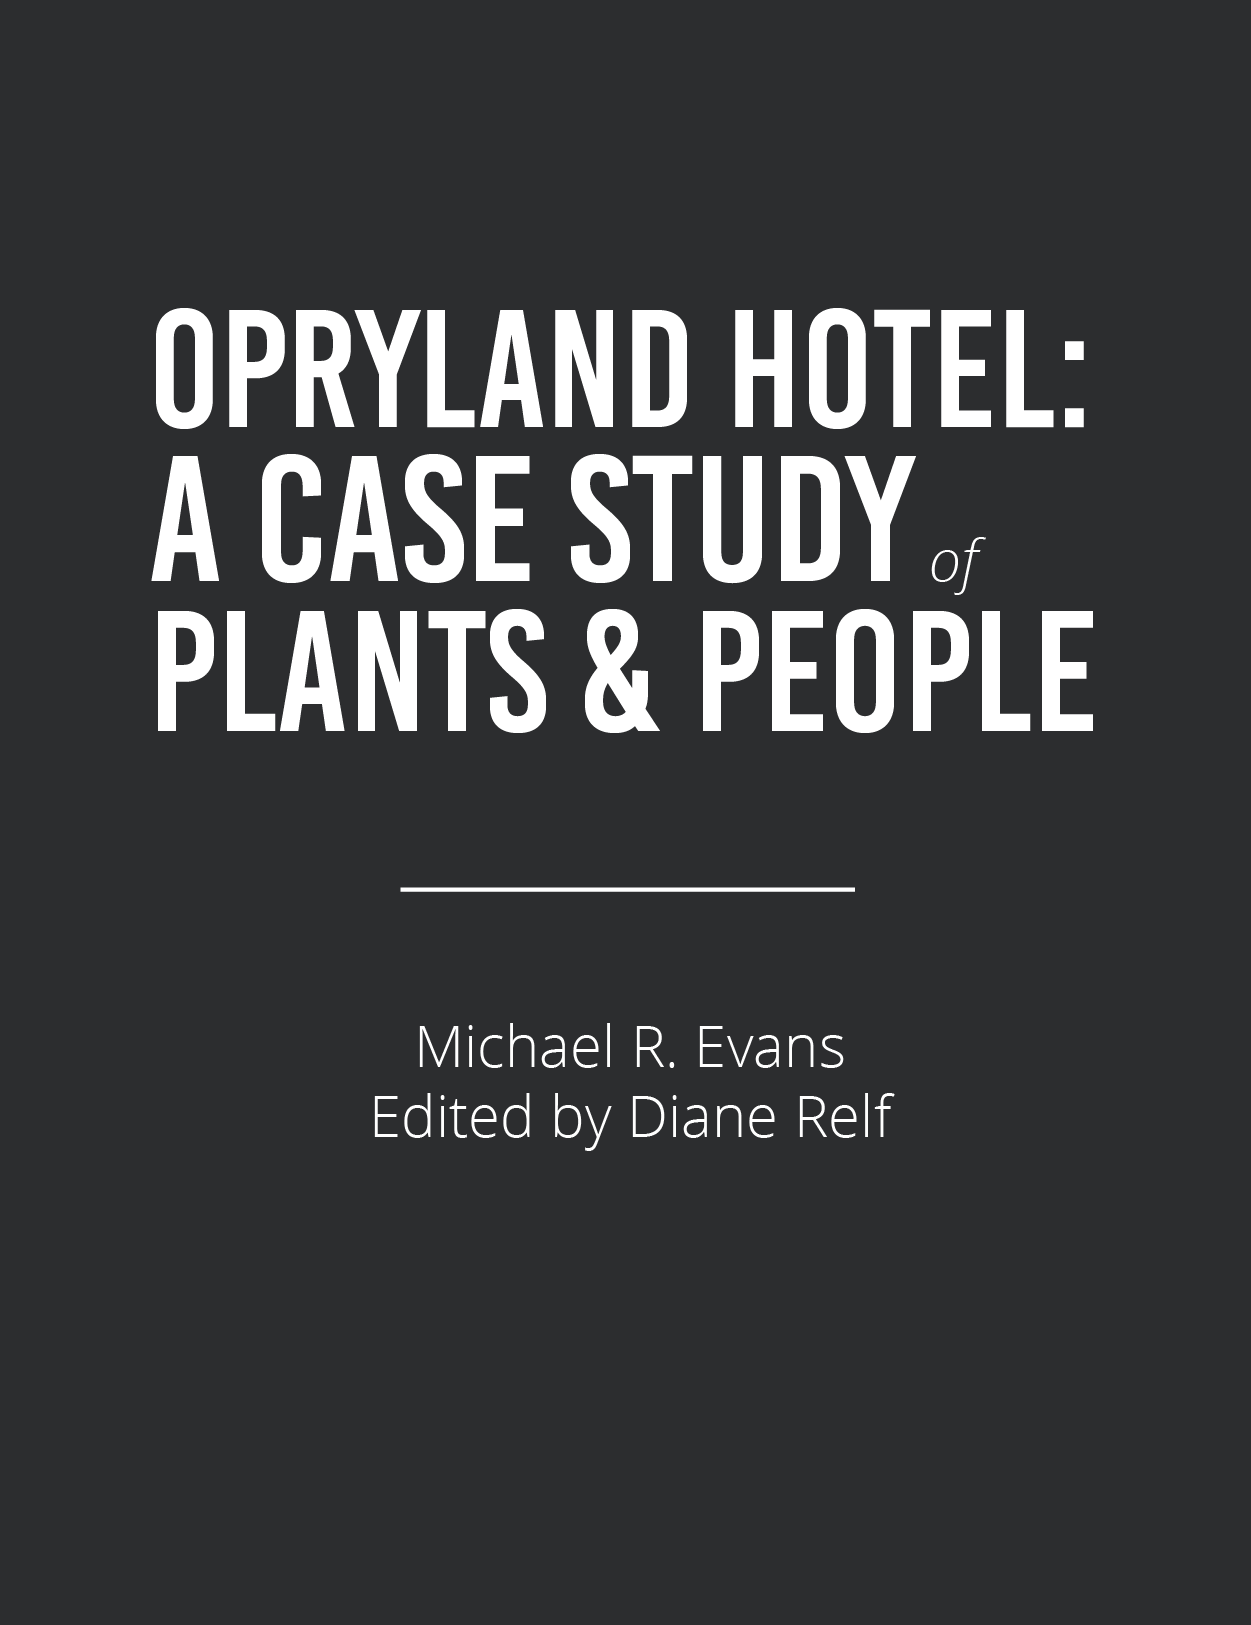 Opryland: Case Study of Plants & PeopleFeatured Image